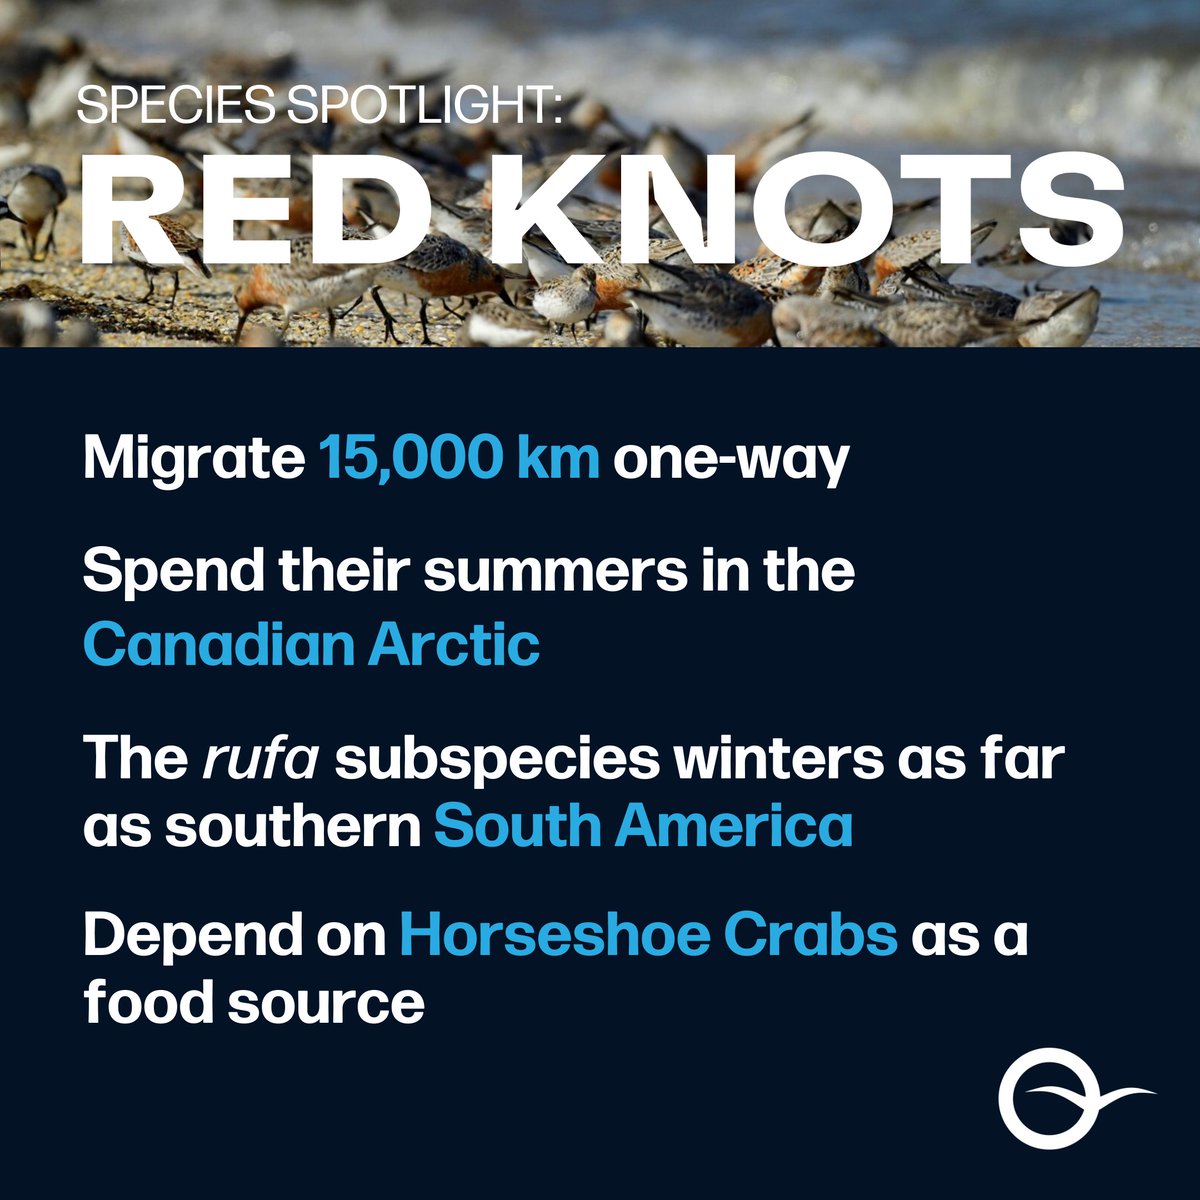 Want to learn more about Red Knots? Here are 4 things to know about the endangered rufa Red Knot subspecies that our AMASS project follows. #SpaceForBirds